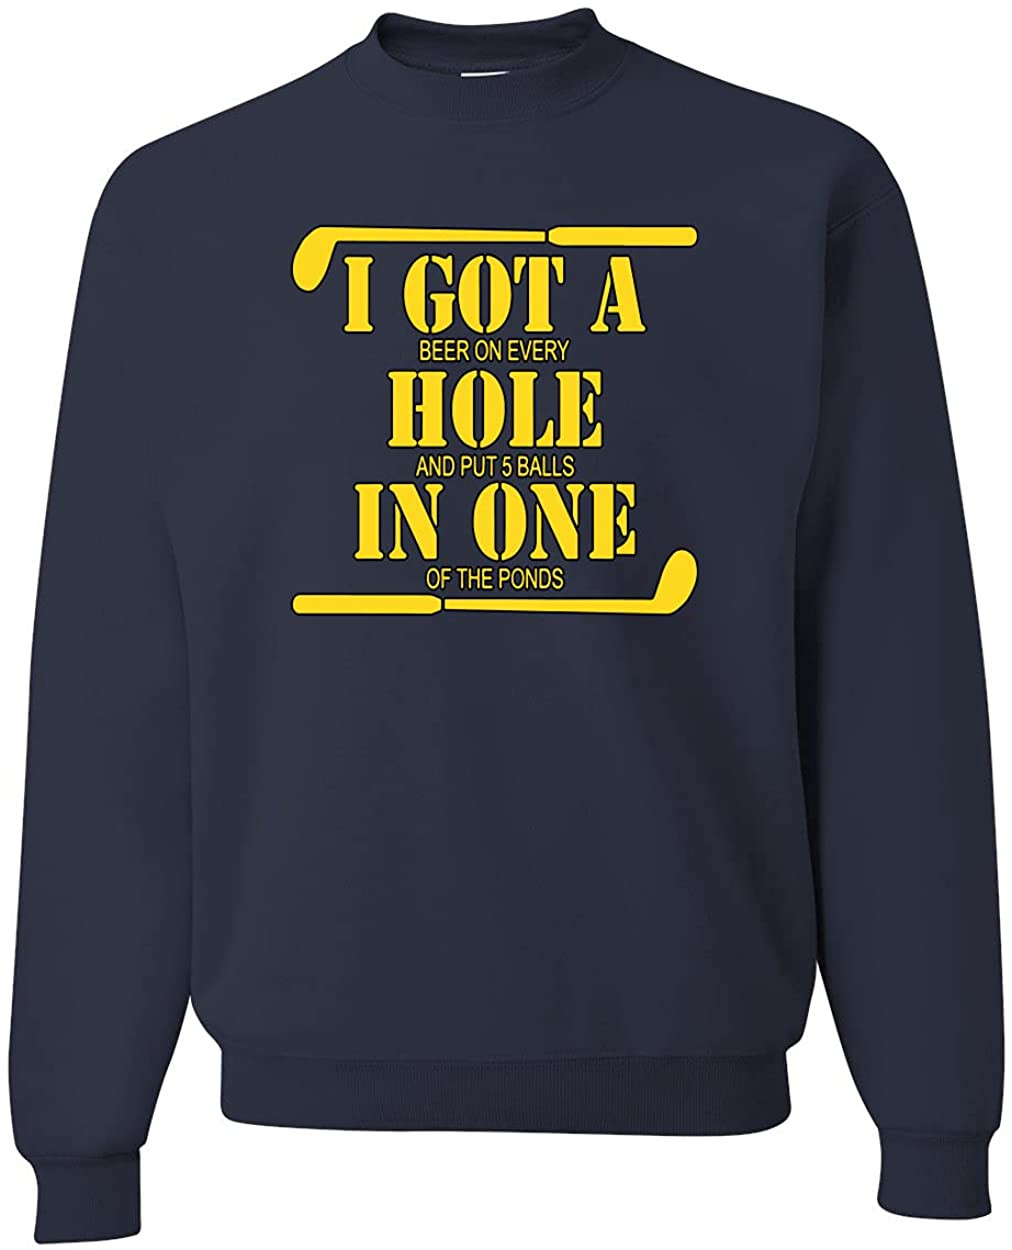 Beer On Every Hole T-Shirt